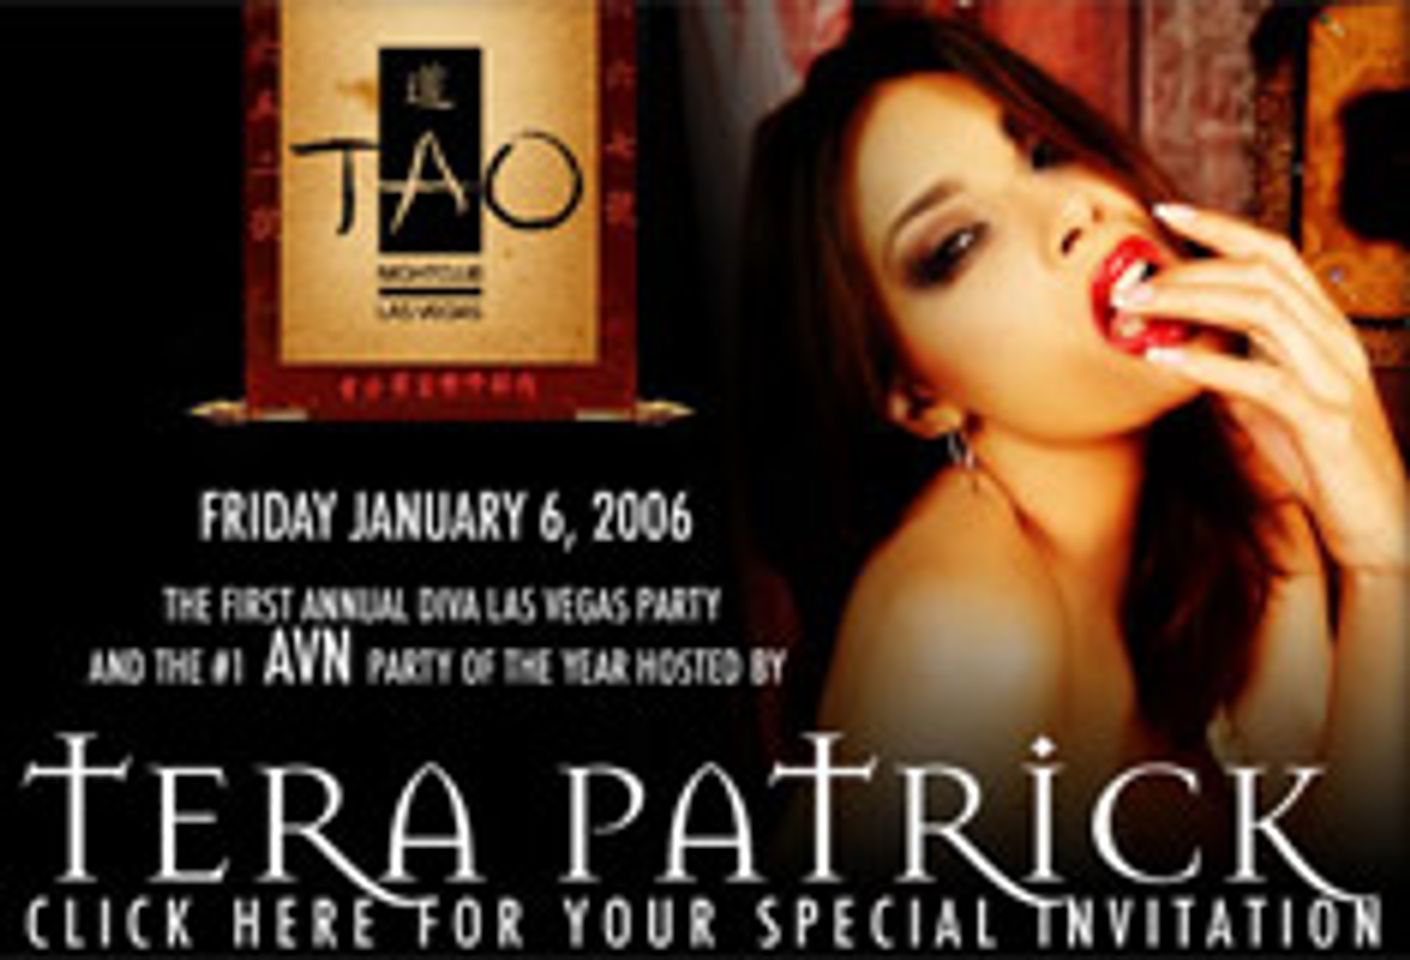 Patrick to Host First Annual Diva Las Vegas Party